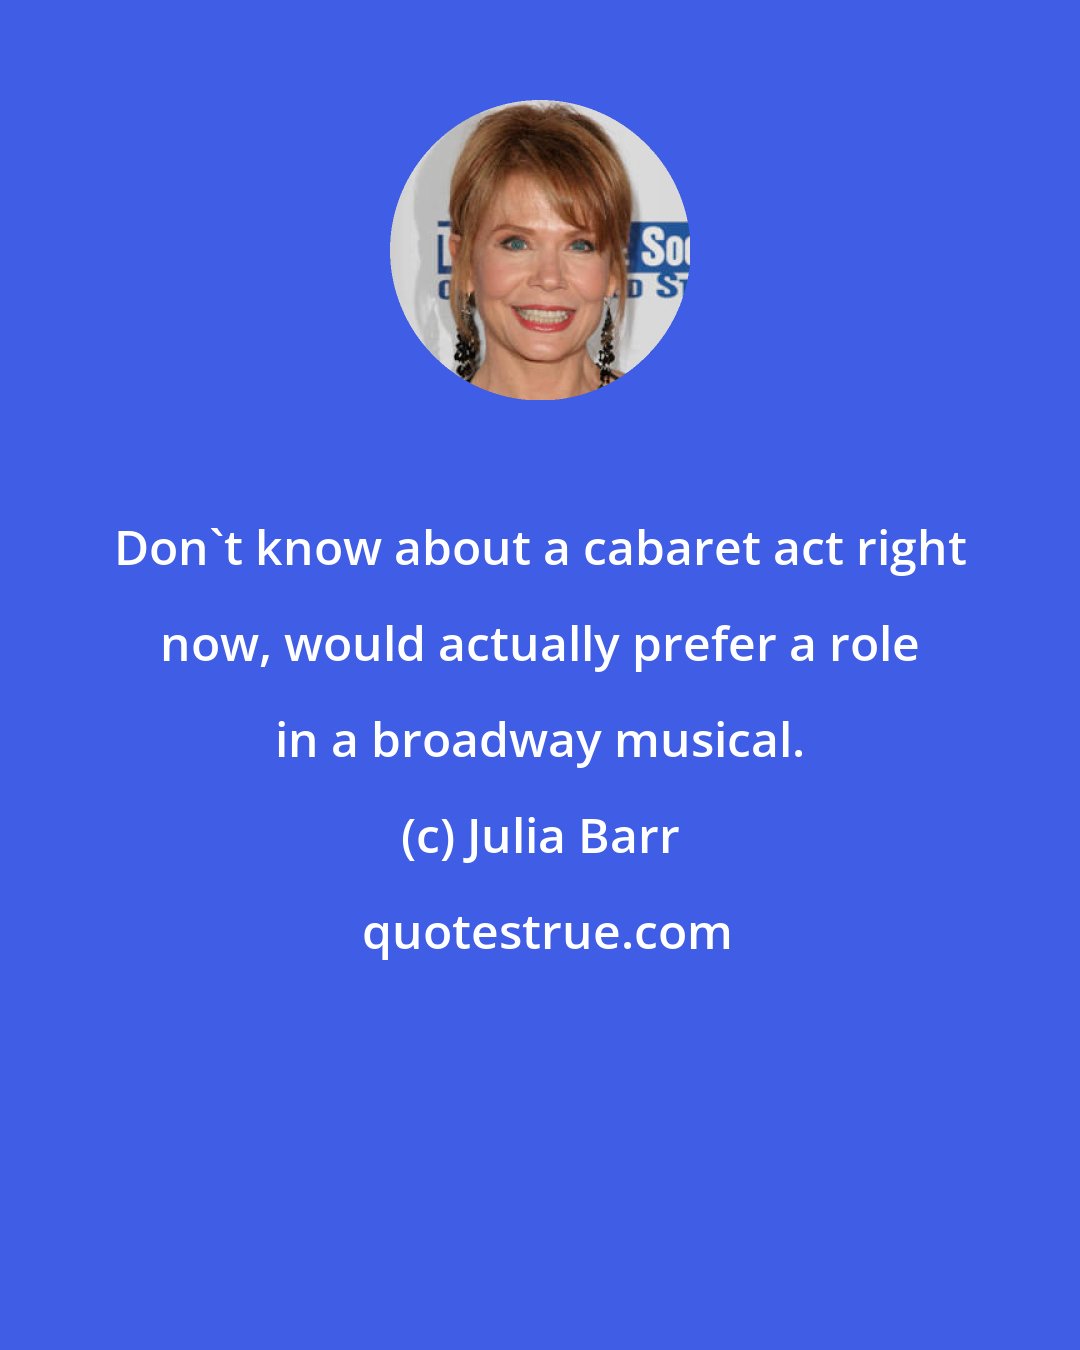 Julia Barr: Don't know about a cabaret act right now, would actually prefer a role in a broadway musical.